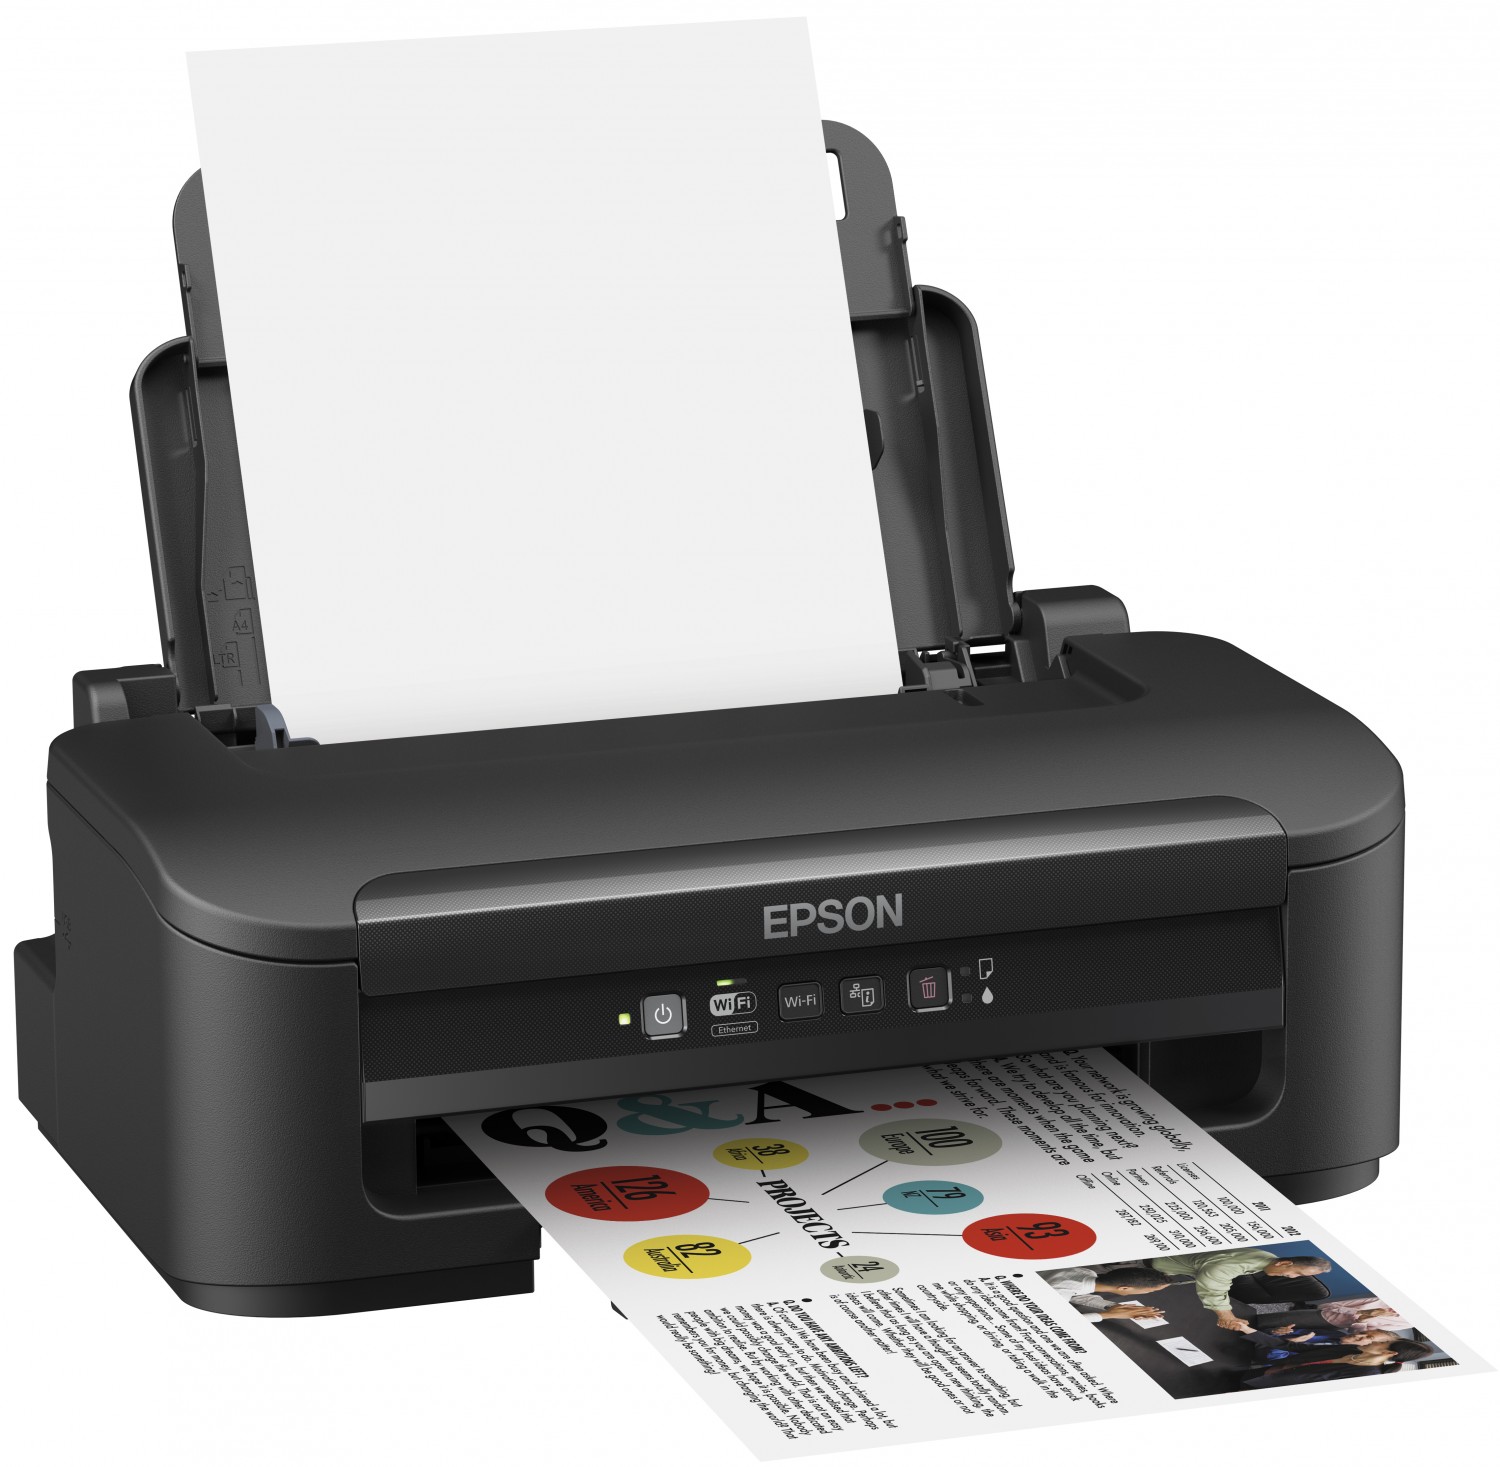 Epson Drivers For Windows 10